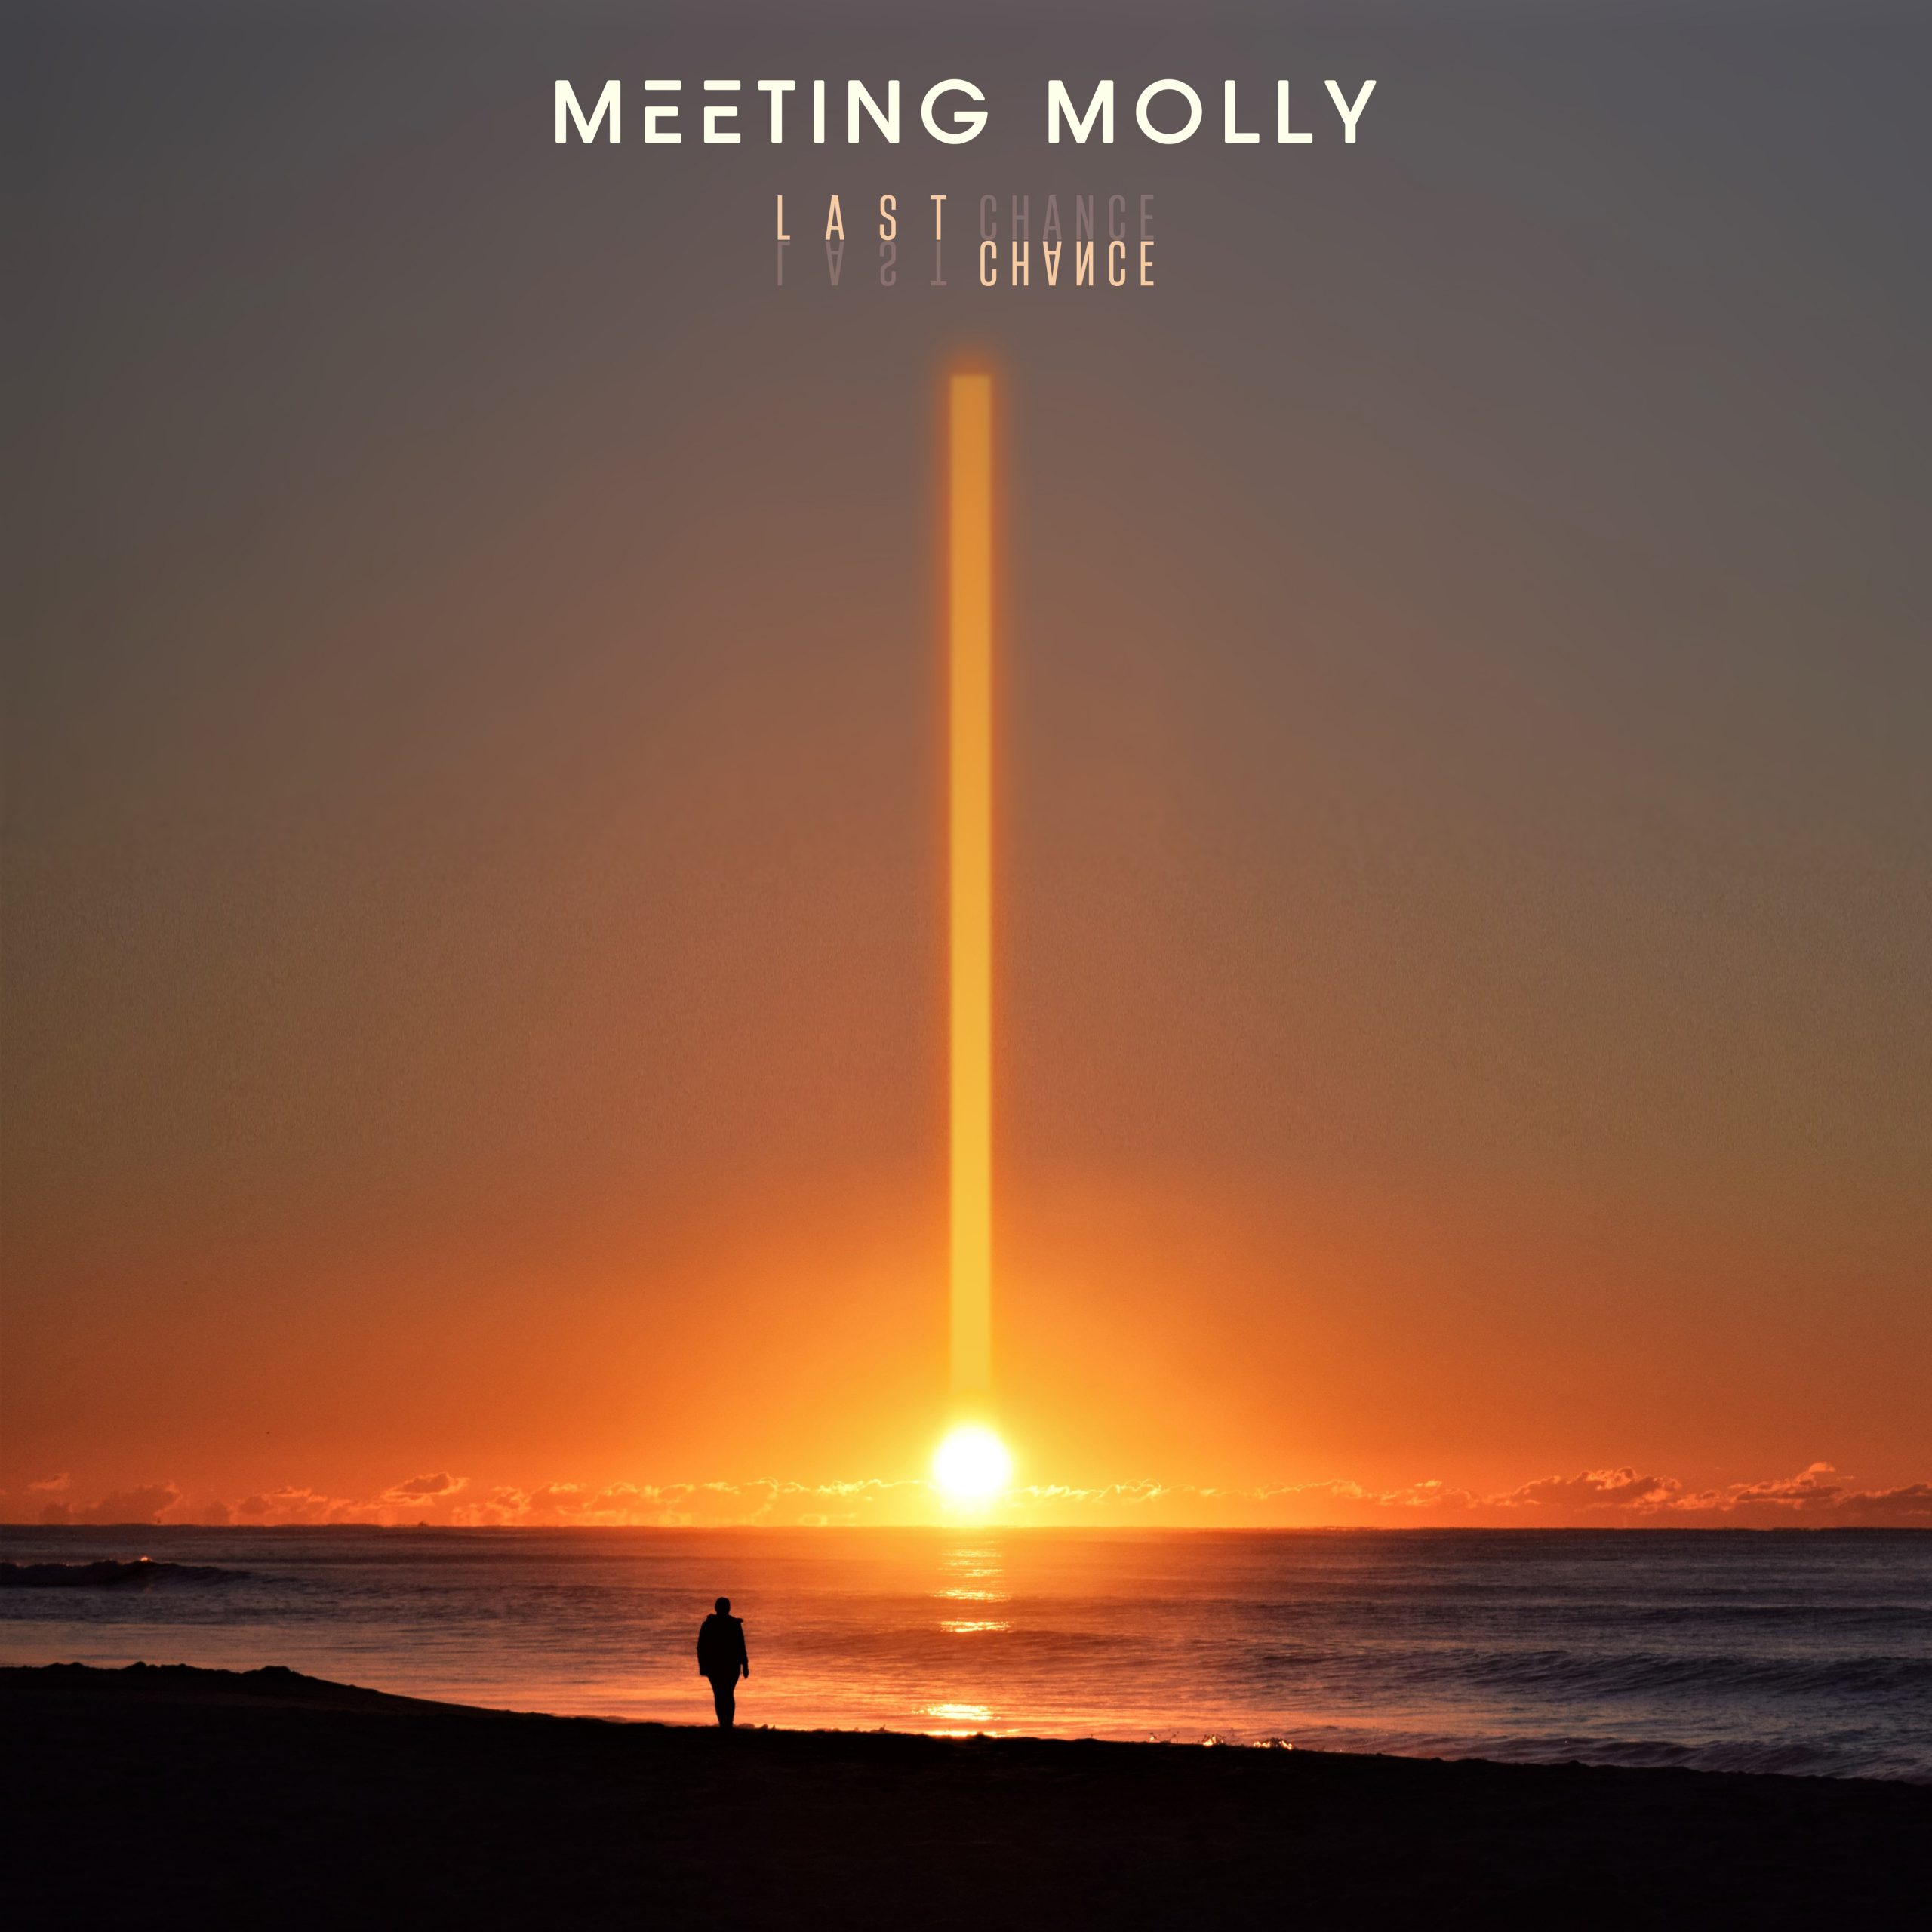 Meeting Molly - Last Chance